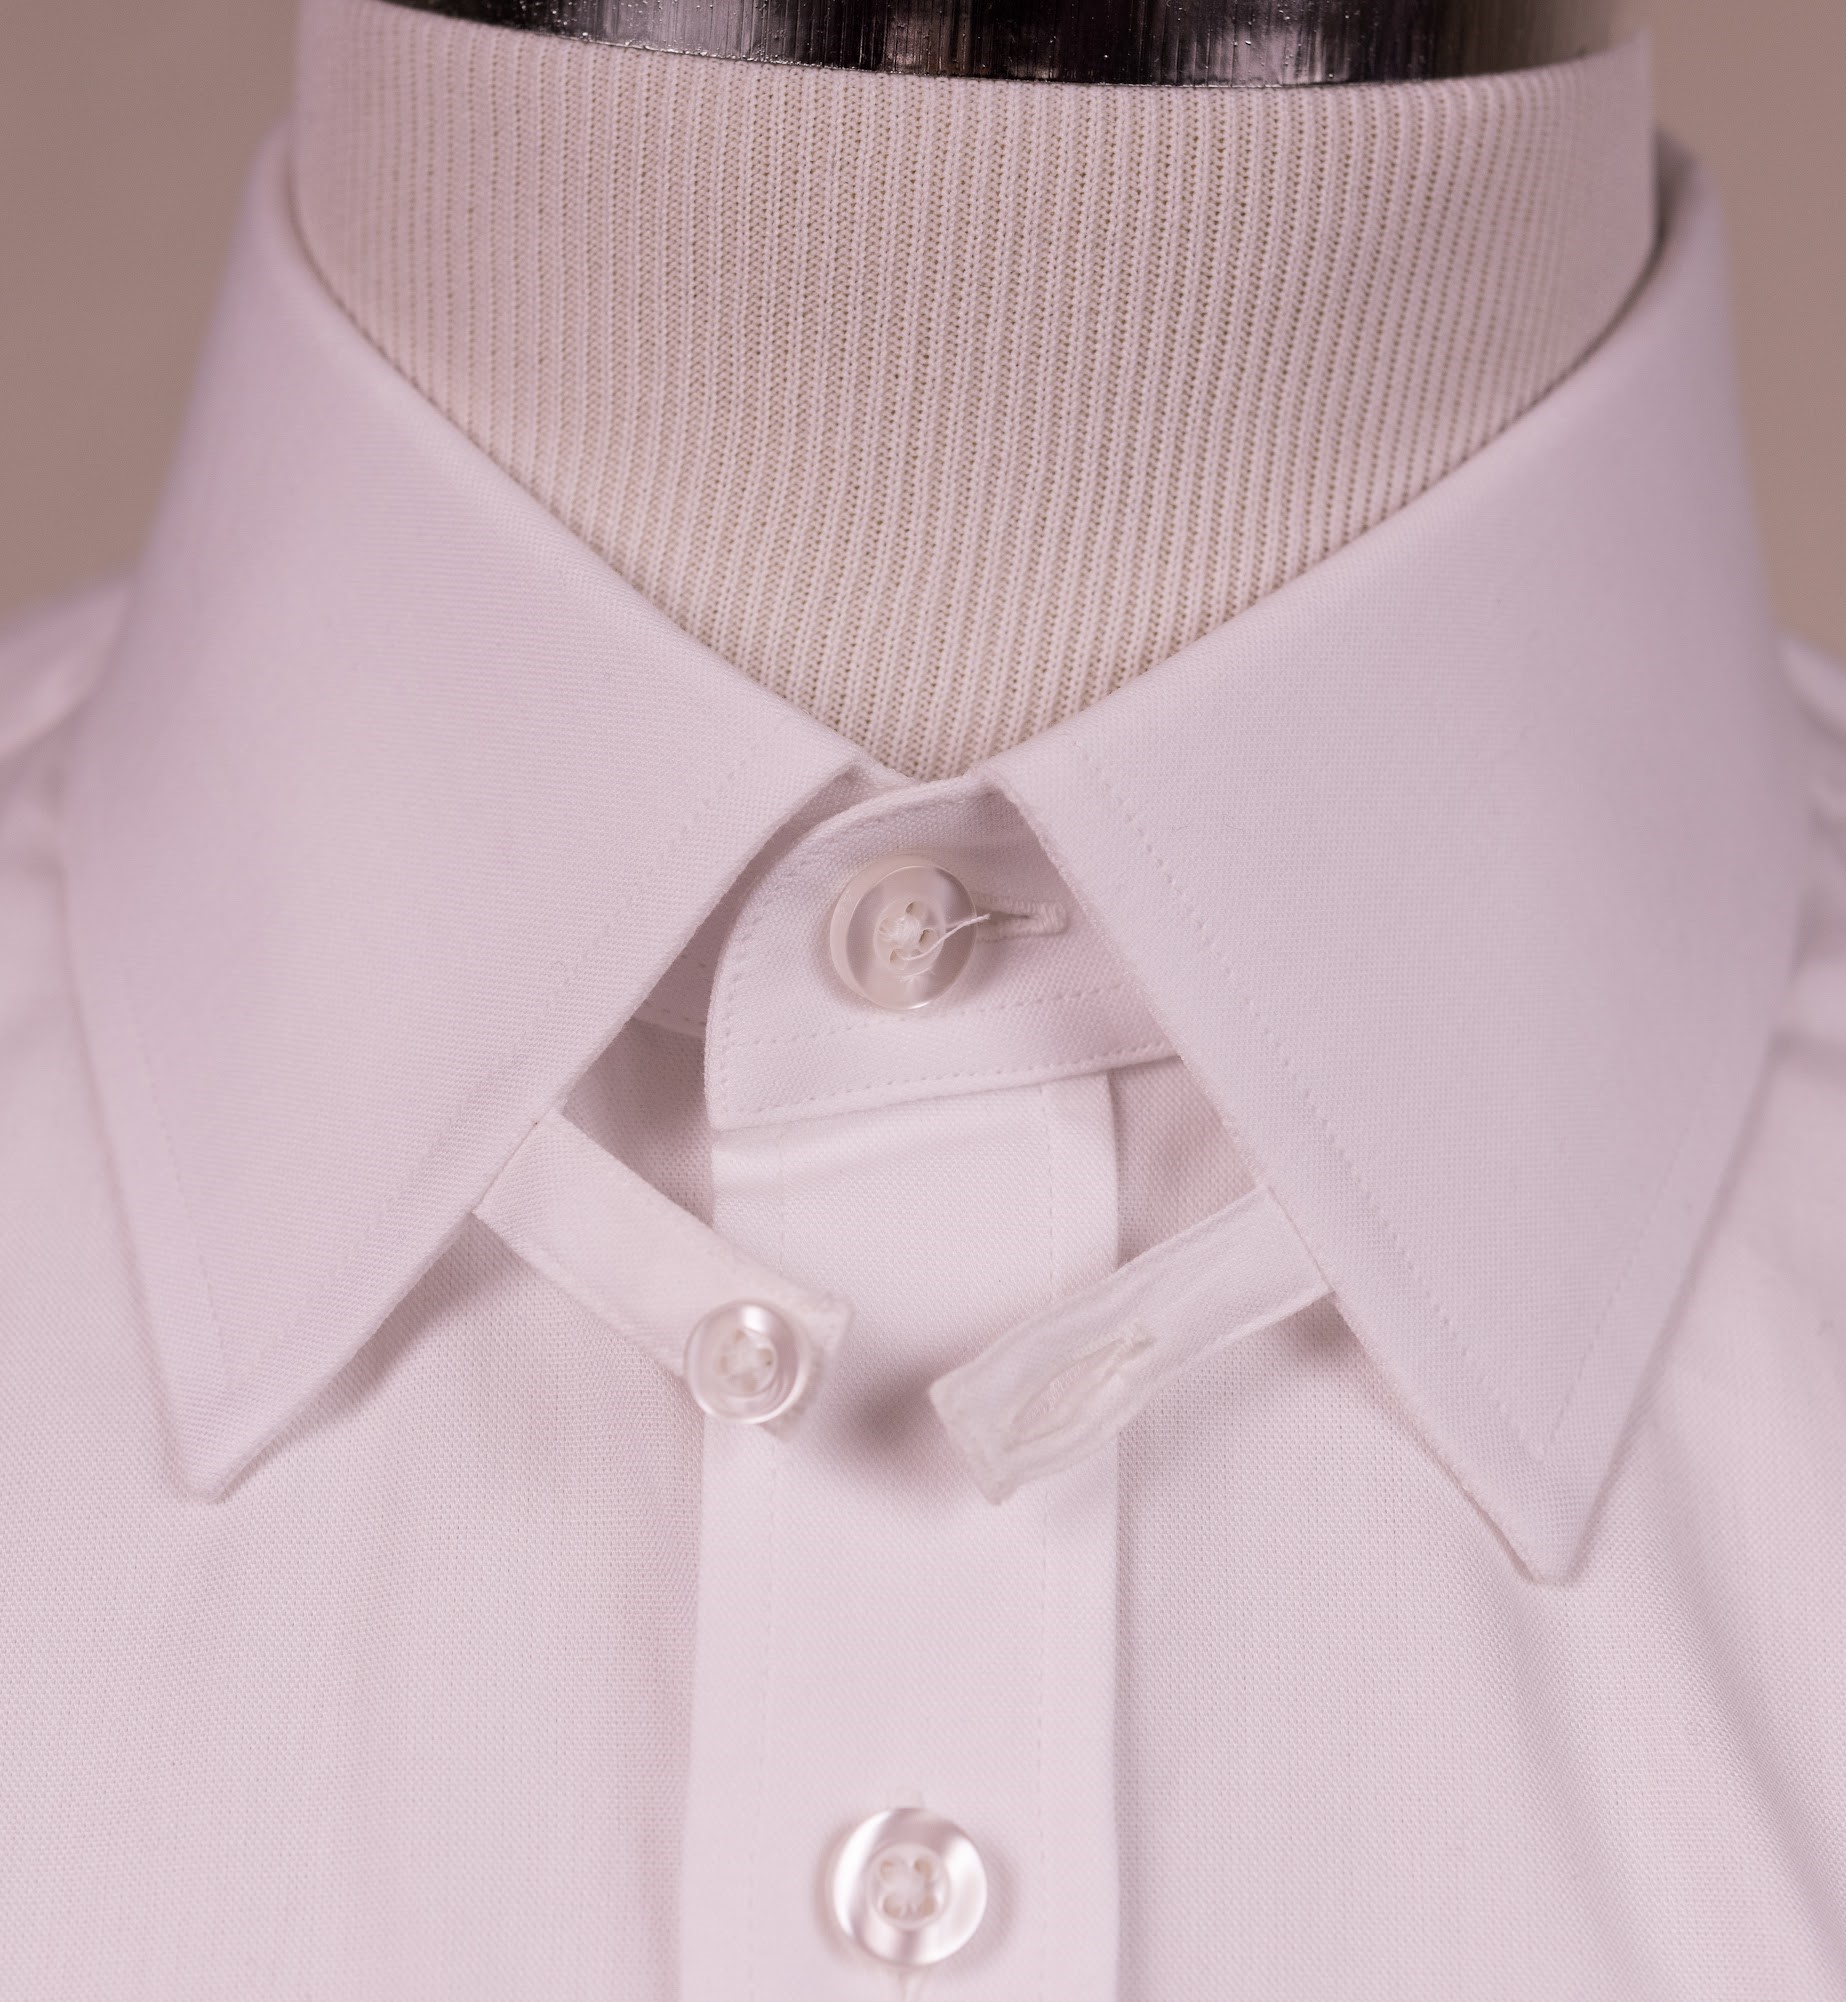 Tab collars can be elegant but should not be paired with the Half Windsor Knot